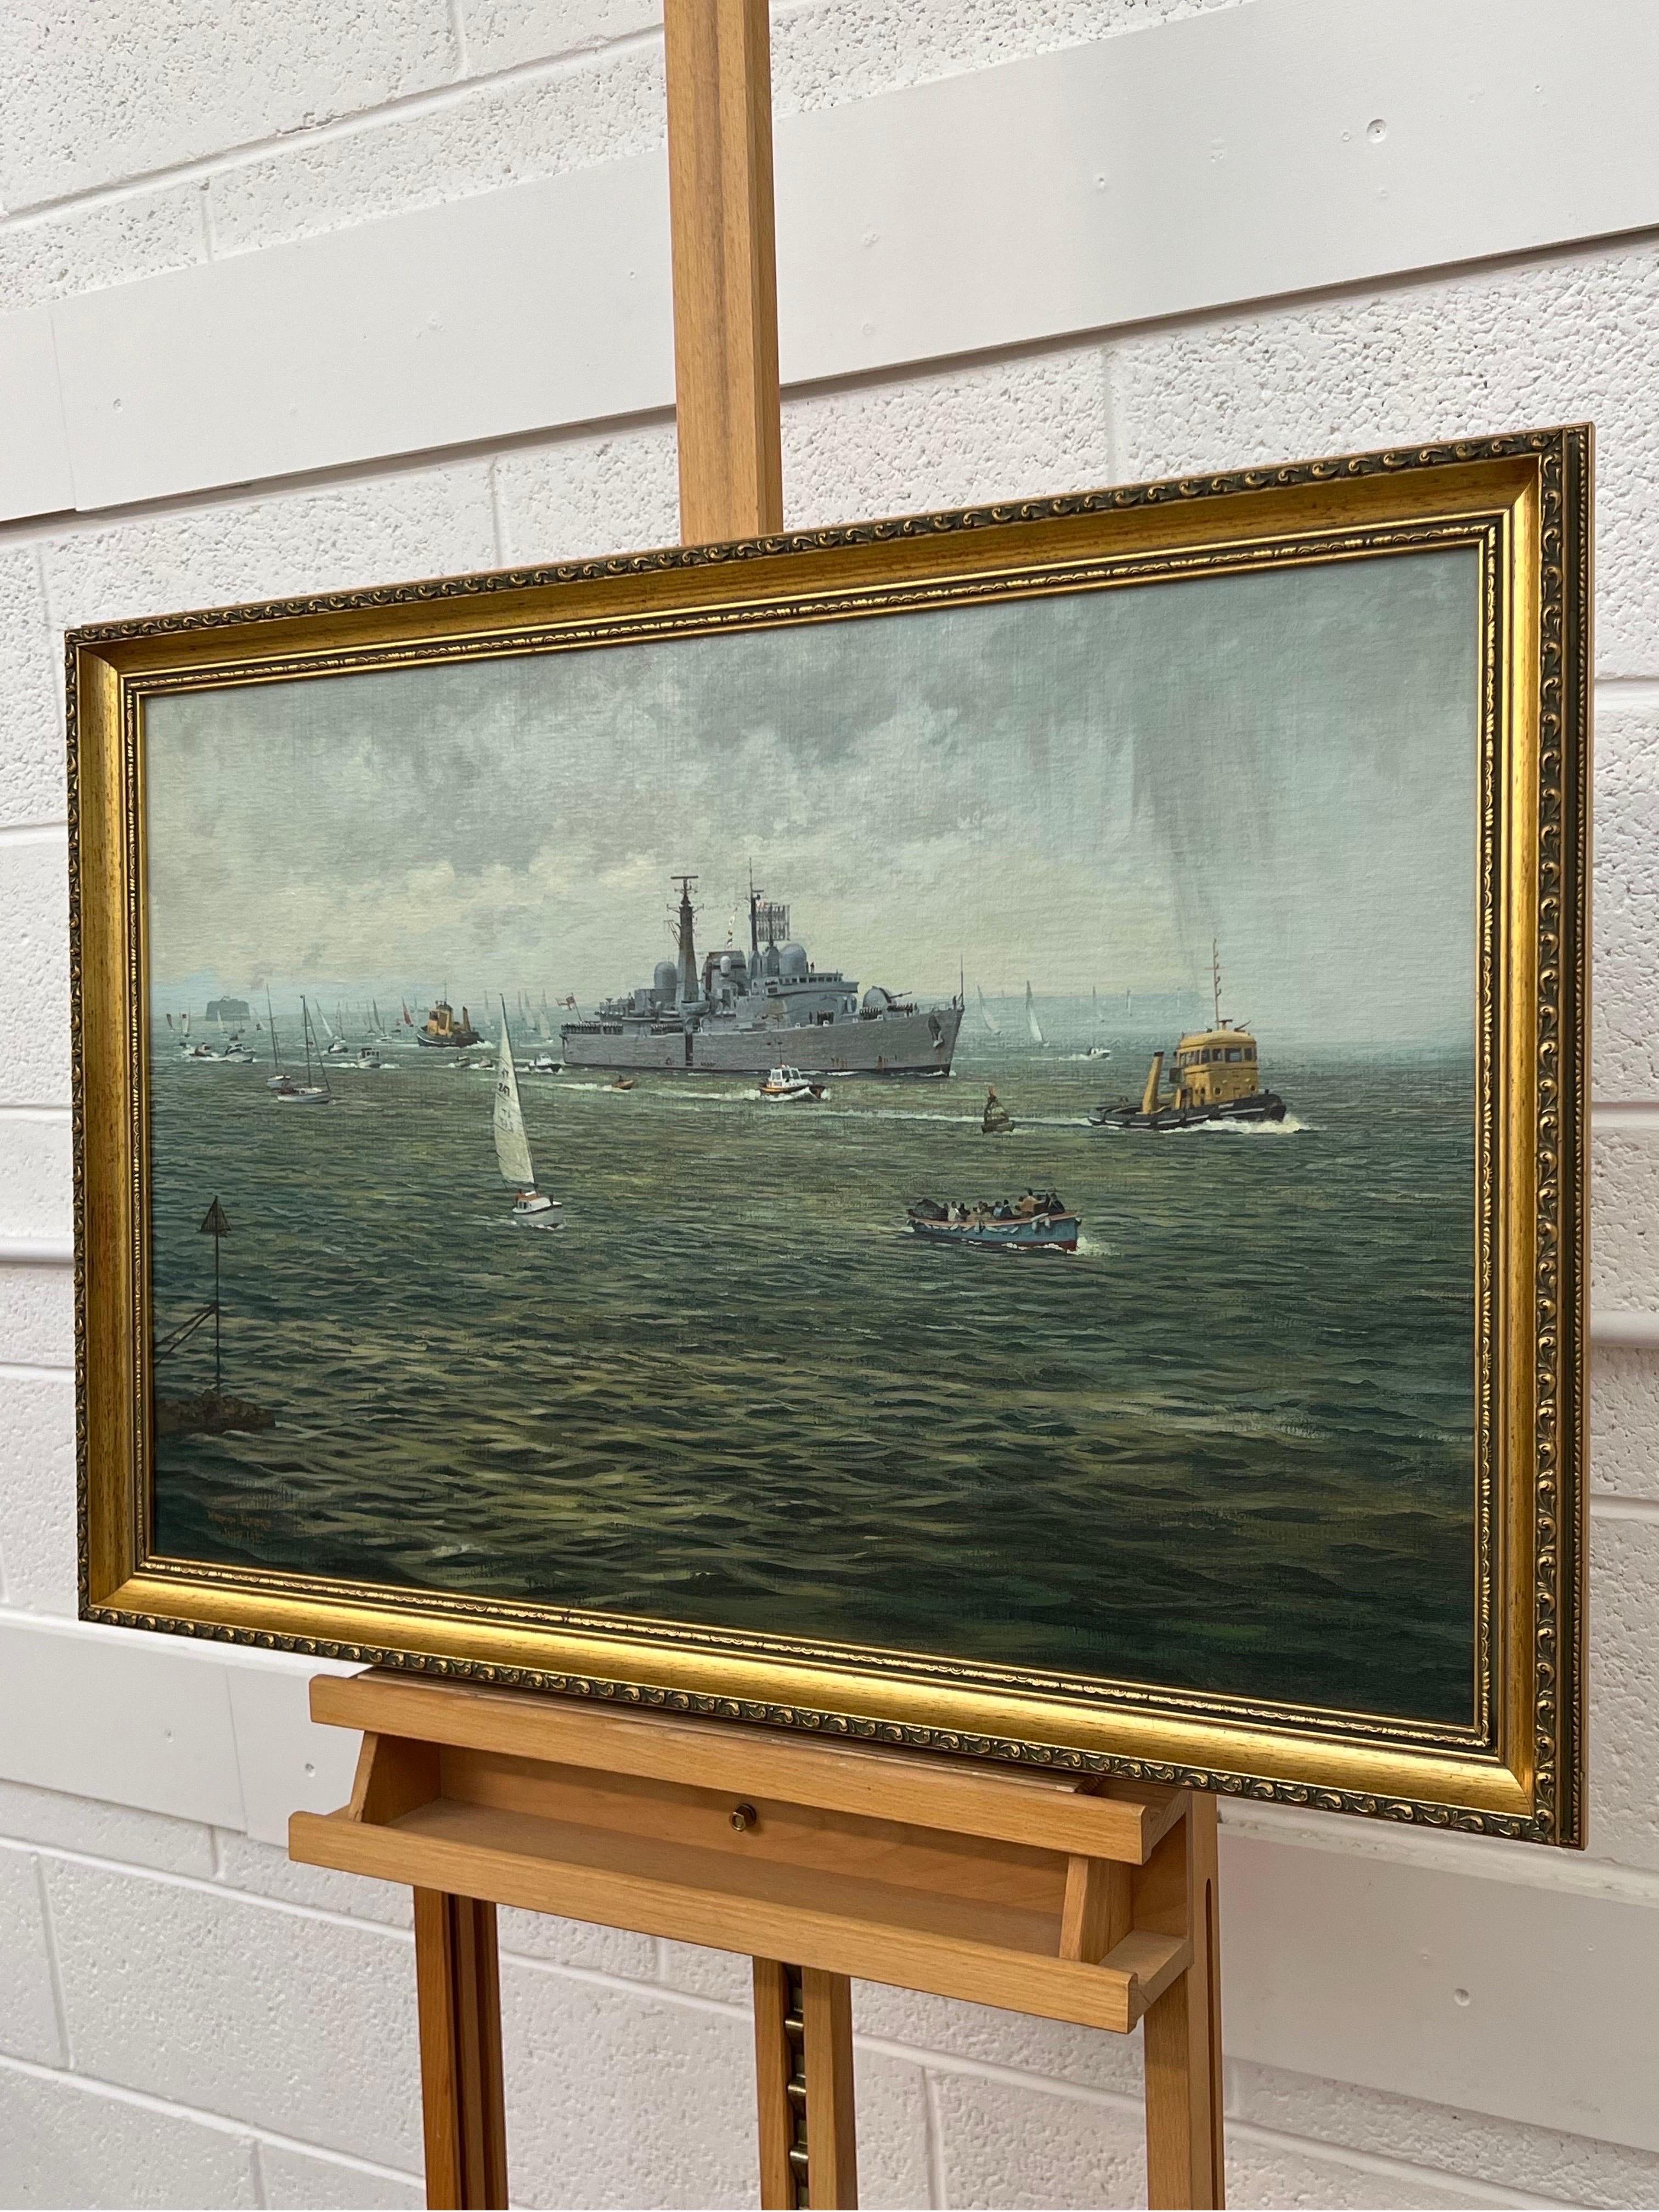 HMS Glasgow returning from the Falkland Islands - Shipping Scene Warship & other Vessels by British Artist Norman Elford GRA (1931 - 2007) 

Art measures 29 x 20 inches 
Frame measures 33 x 23 inches 


